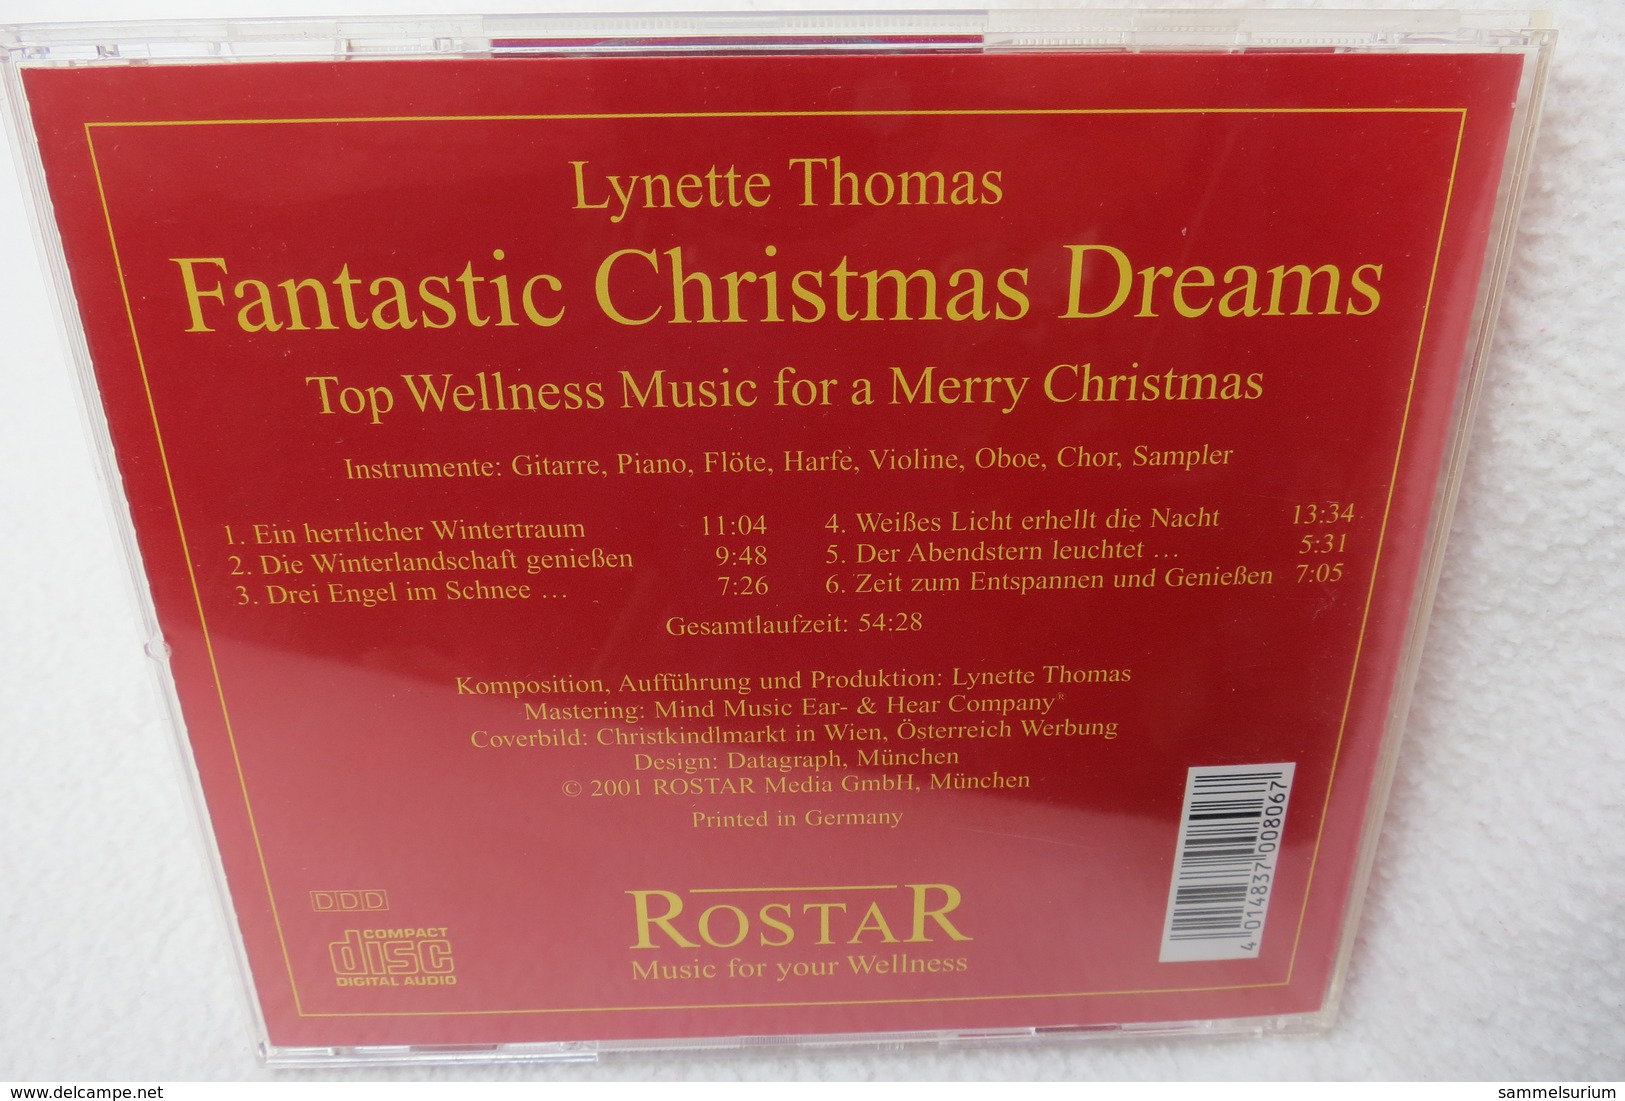 CD "Fantastic Christmas Dreams" Top Wellness Music For A Merry Christmas, Lynette Thomas - Weihnachtslieder